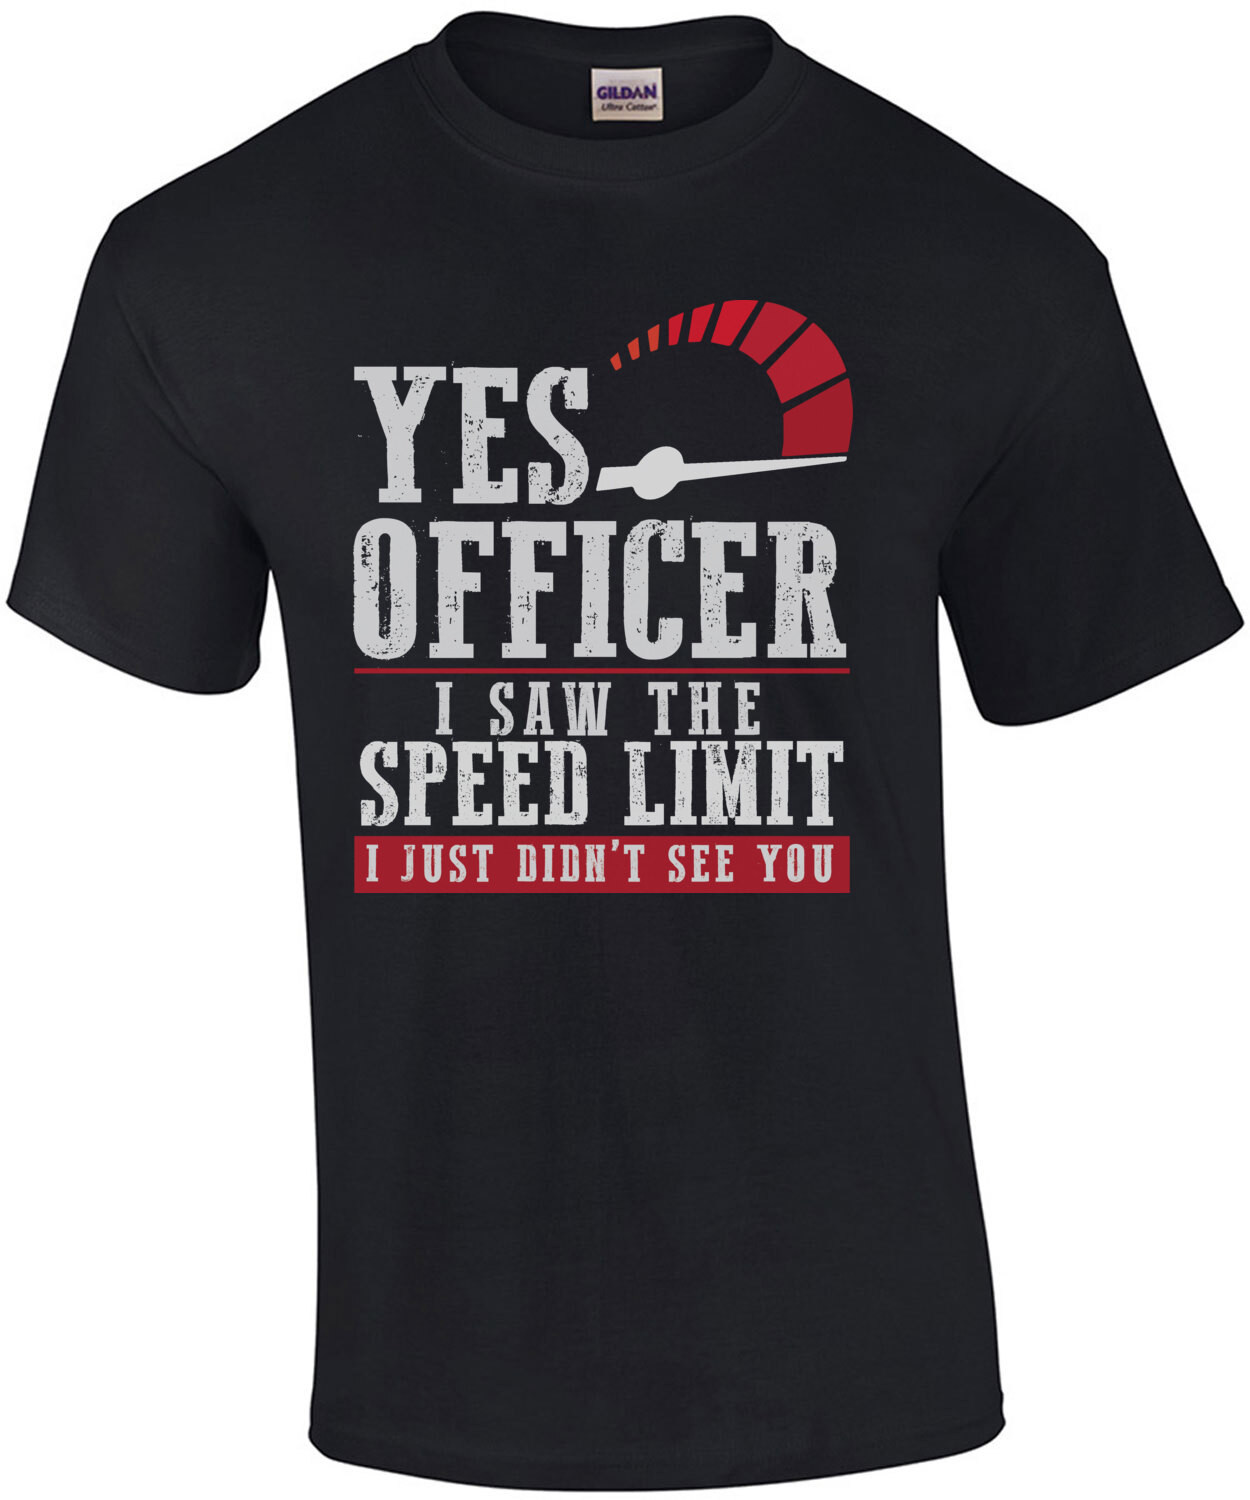 Yes officer I saw the speed limit I just didn't see you - funny speeding t-shirt